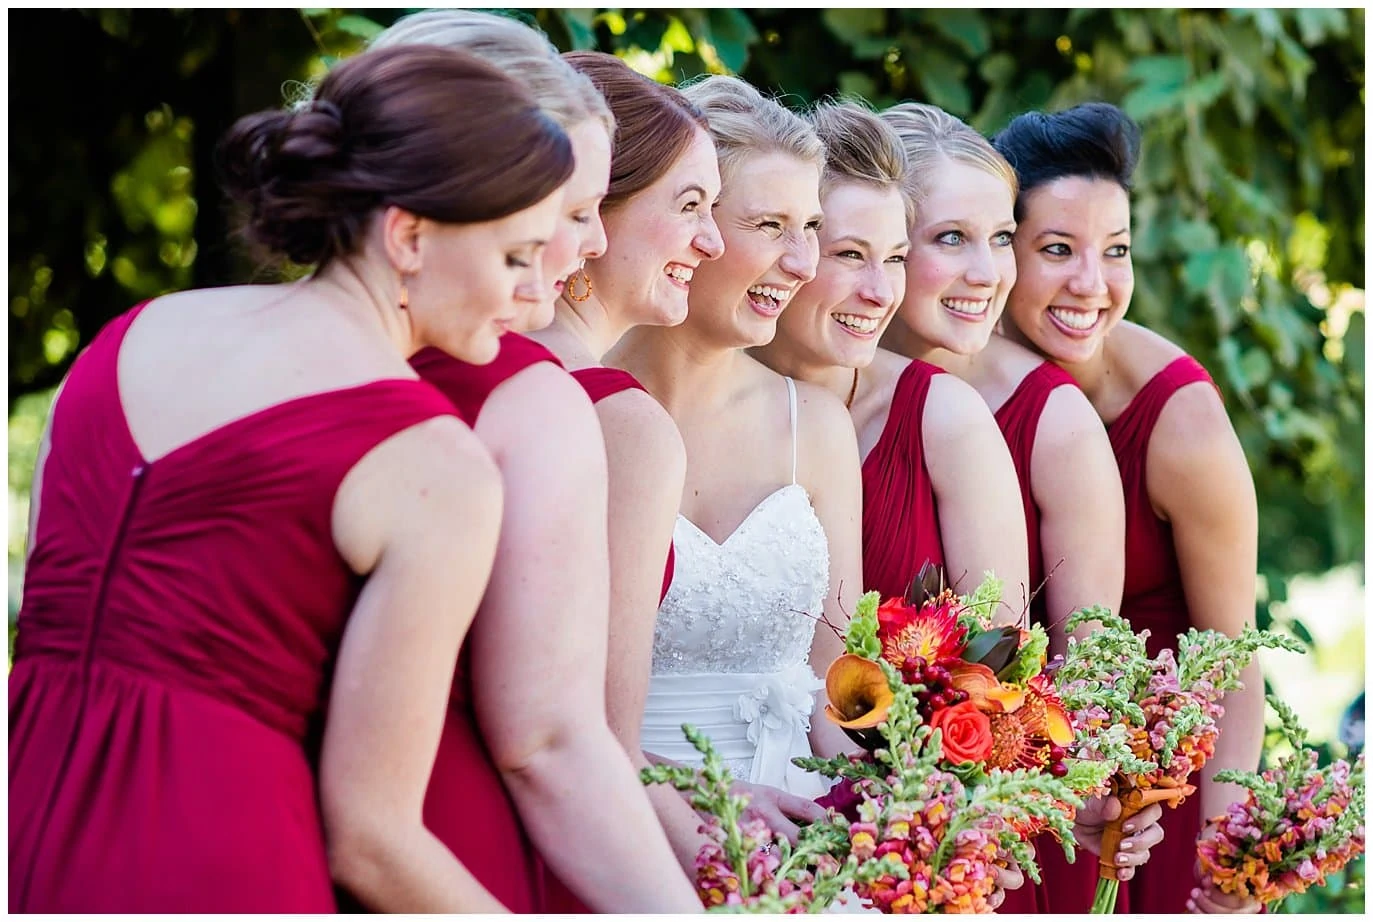 bridal party laughing before ceremony at Denver Botanic Gardens wedding by Denver Botanic Gardens wedding photographer Jennie Crate